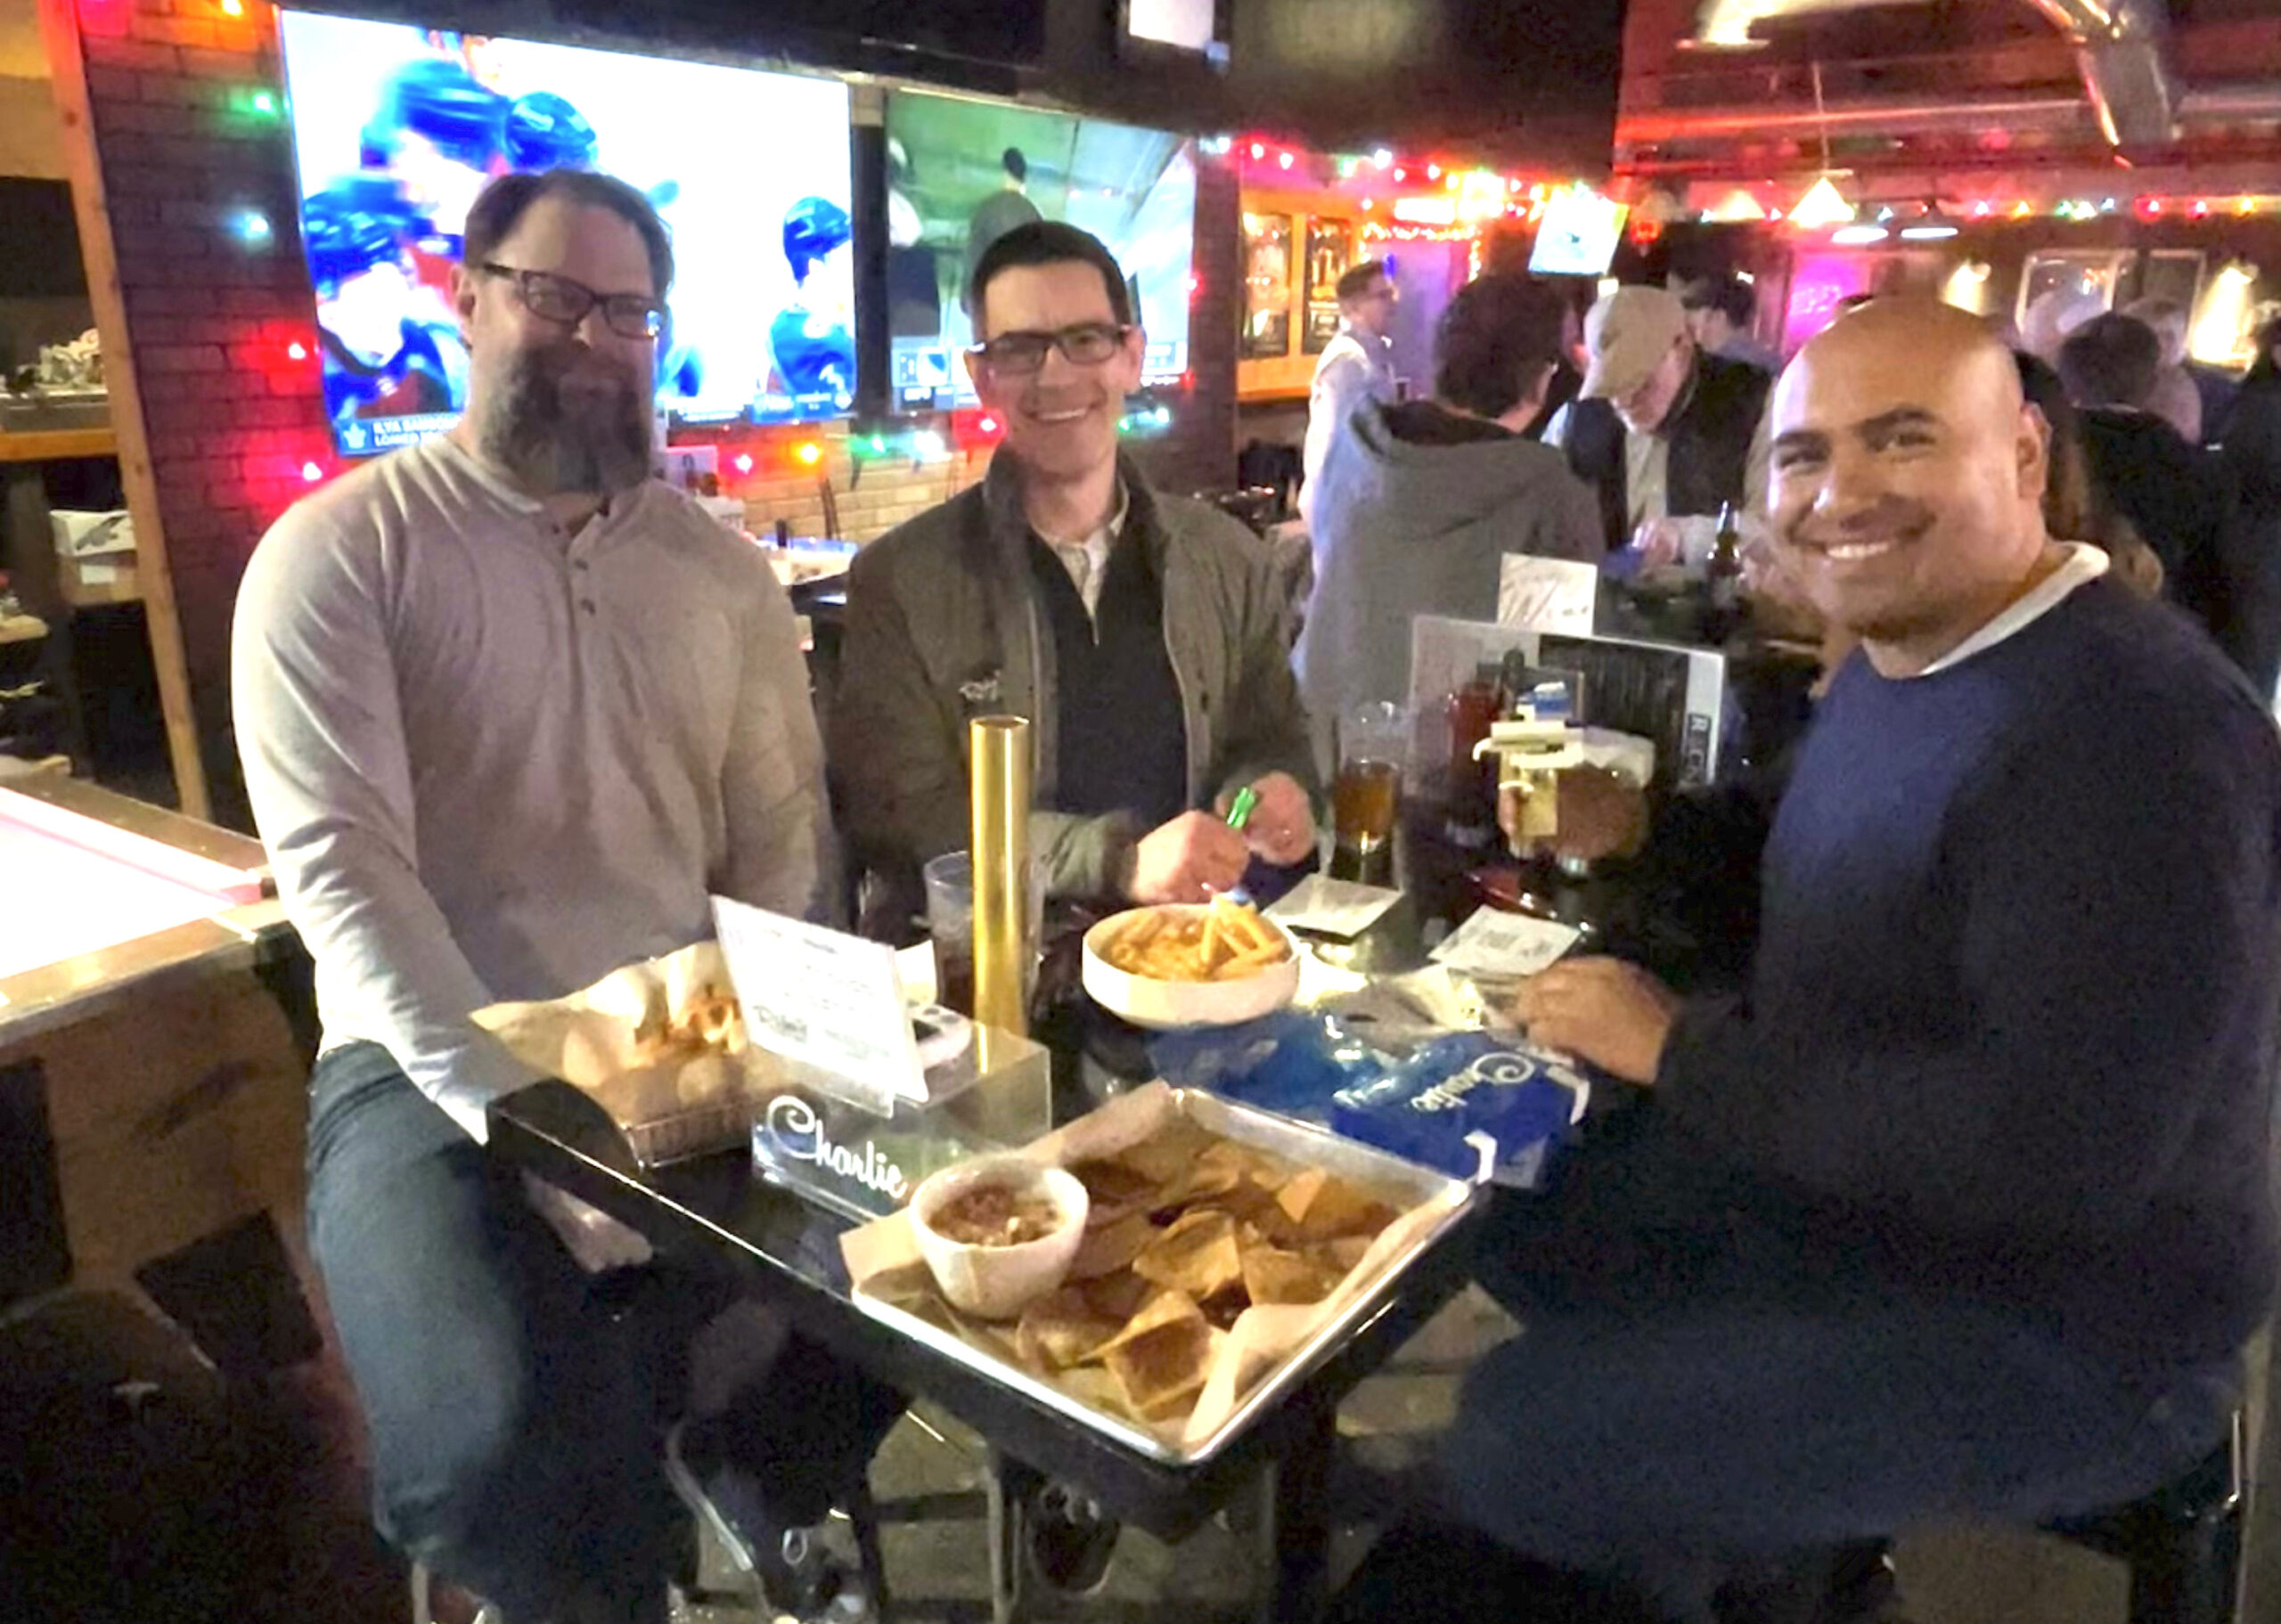 THREE MEN EATING FOOD IN A BAR<br />
